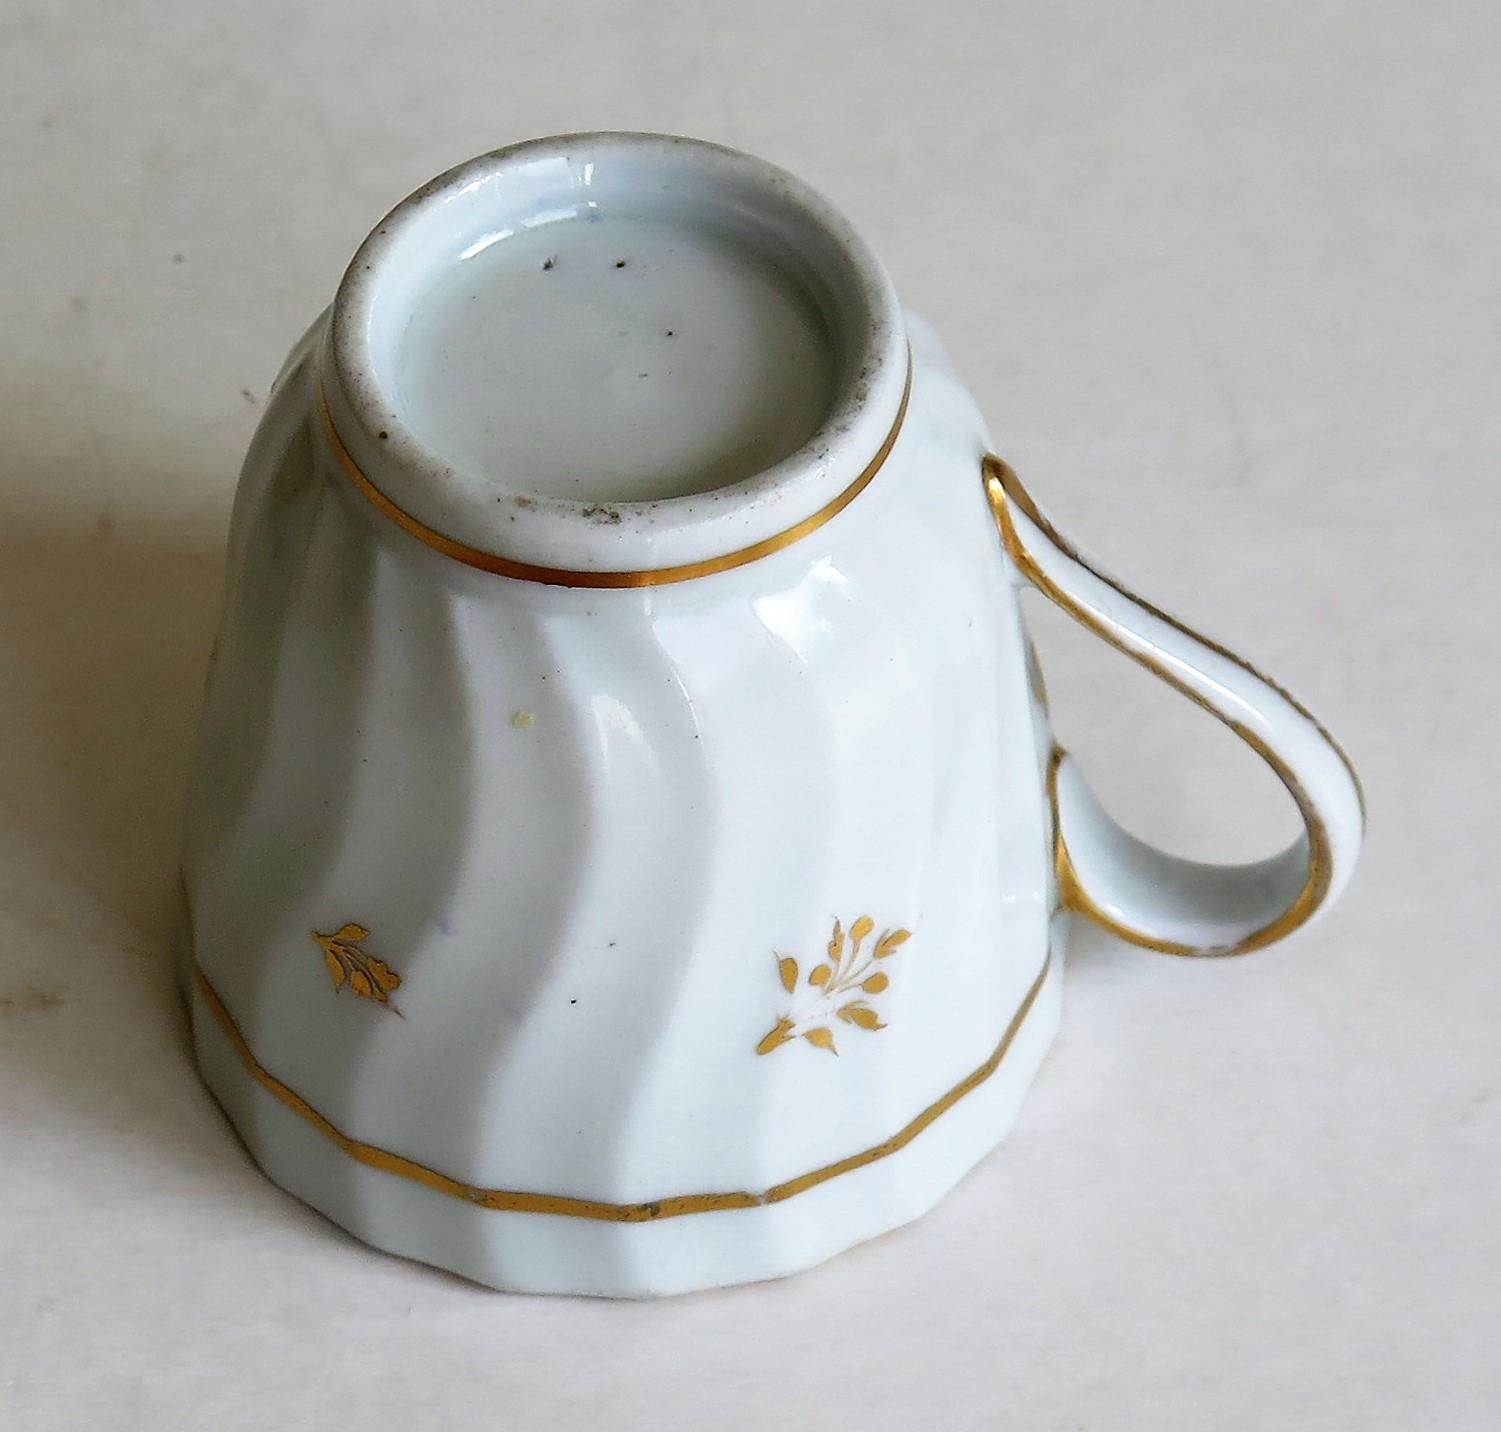 New Hall Porcelain Coffee Cup Shanked and Fluted Body Hand-Painted, circa 1795 11